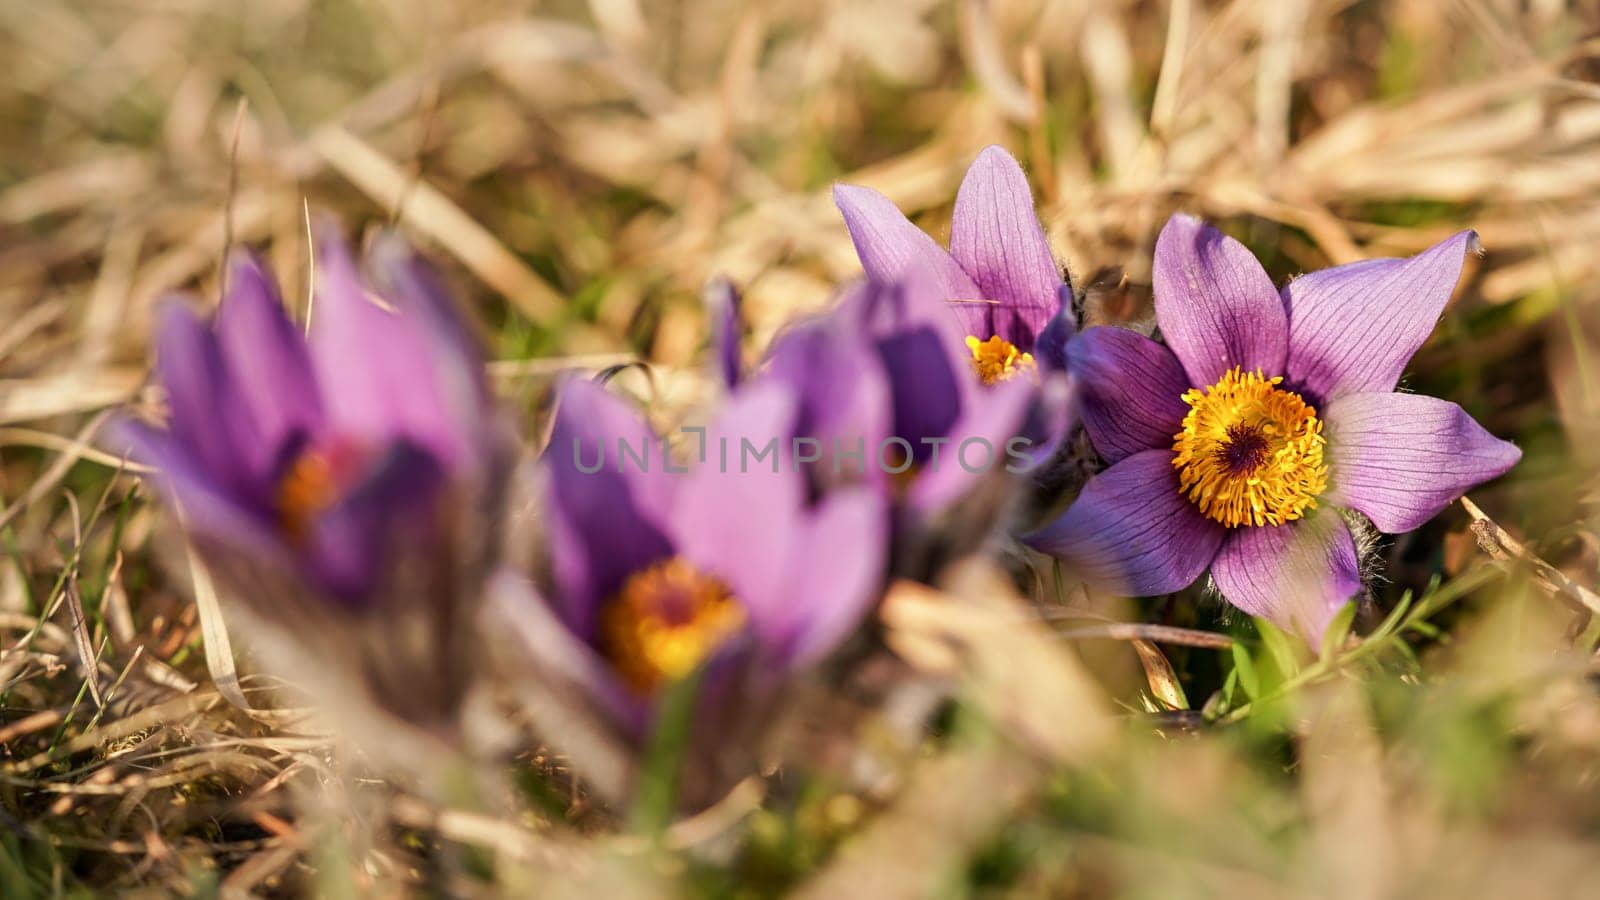 Purple greater pasque flower - Pulsatilla grandis - growing in dry grass, close up detail by Ivanko